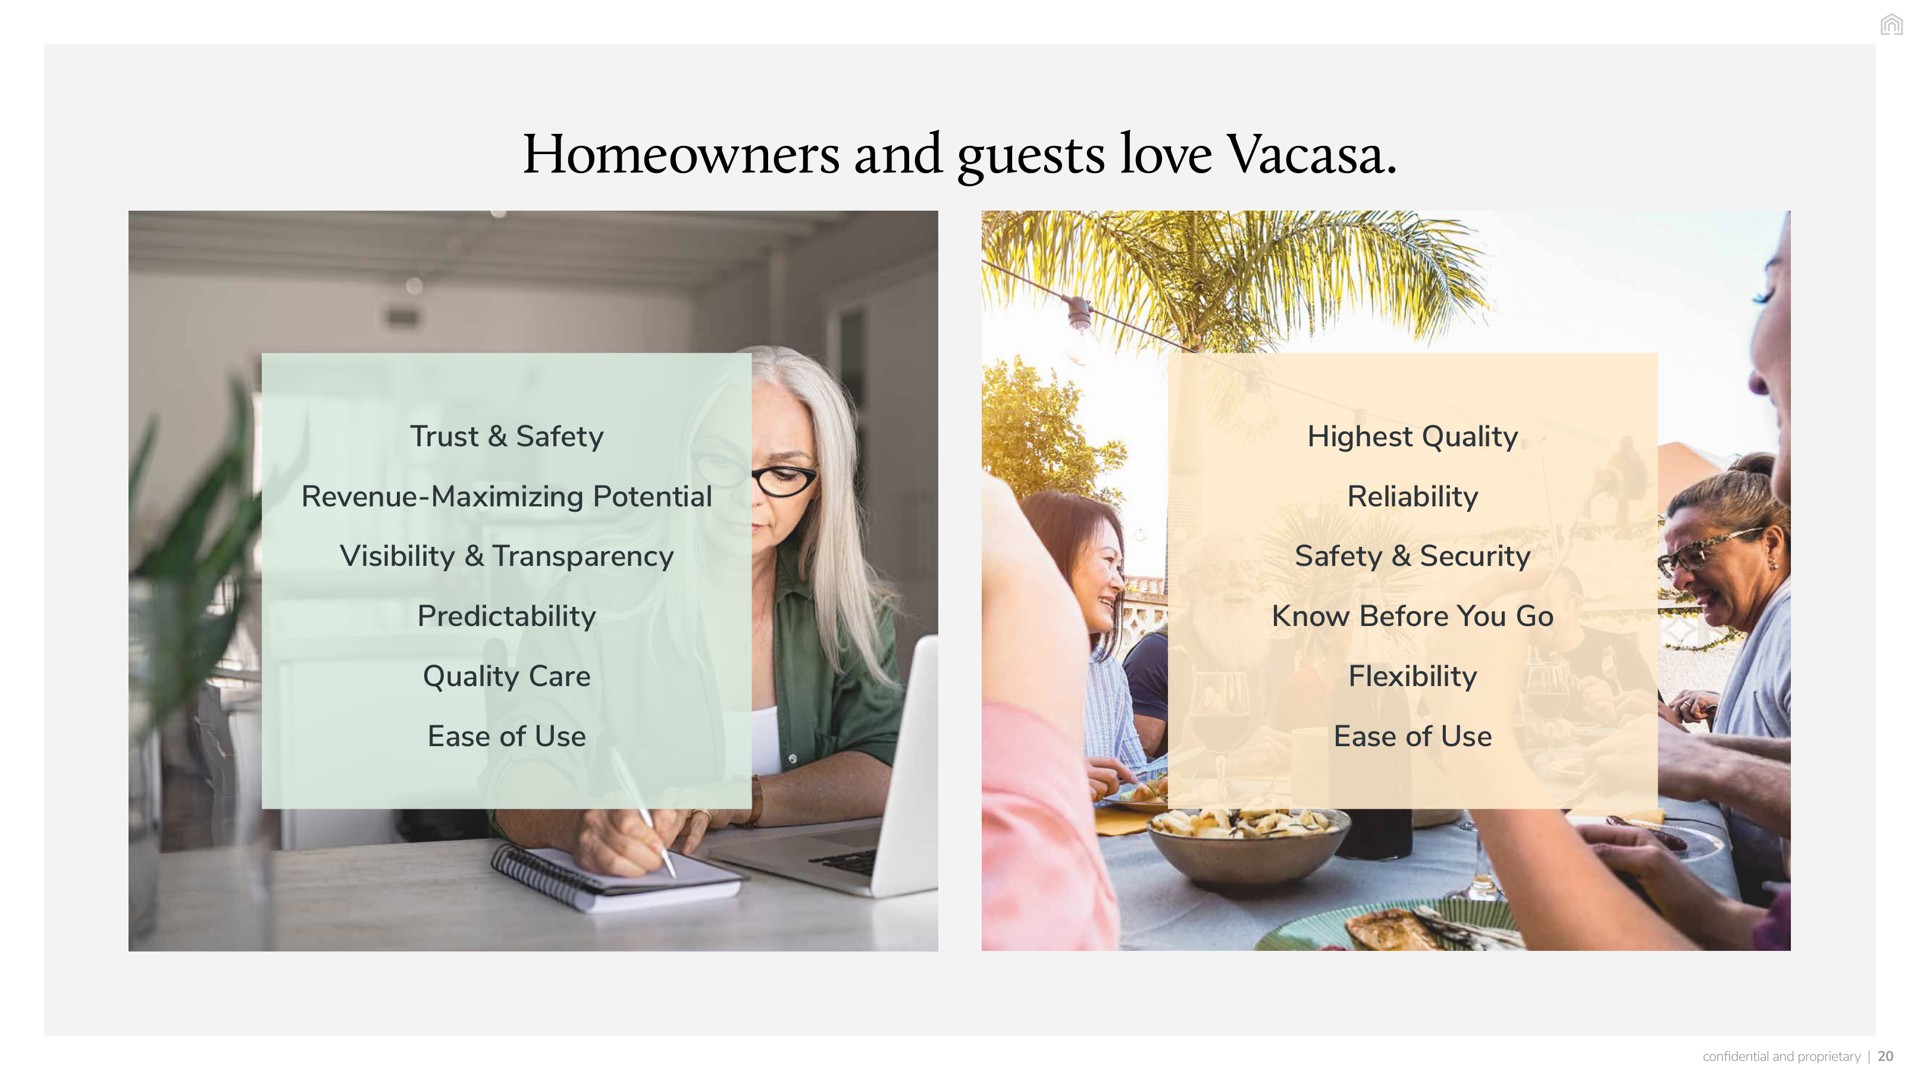 homeowners and guests love trust safety revenue maximizing potential highest quality reliability quality care predictability visibility transparency ease of use know before you go safety security ease of use flexibility confidential proprietary | Vacasa